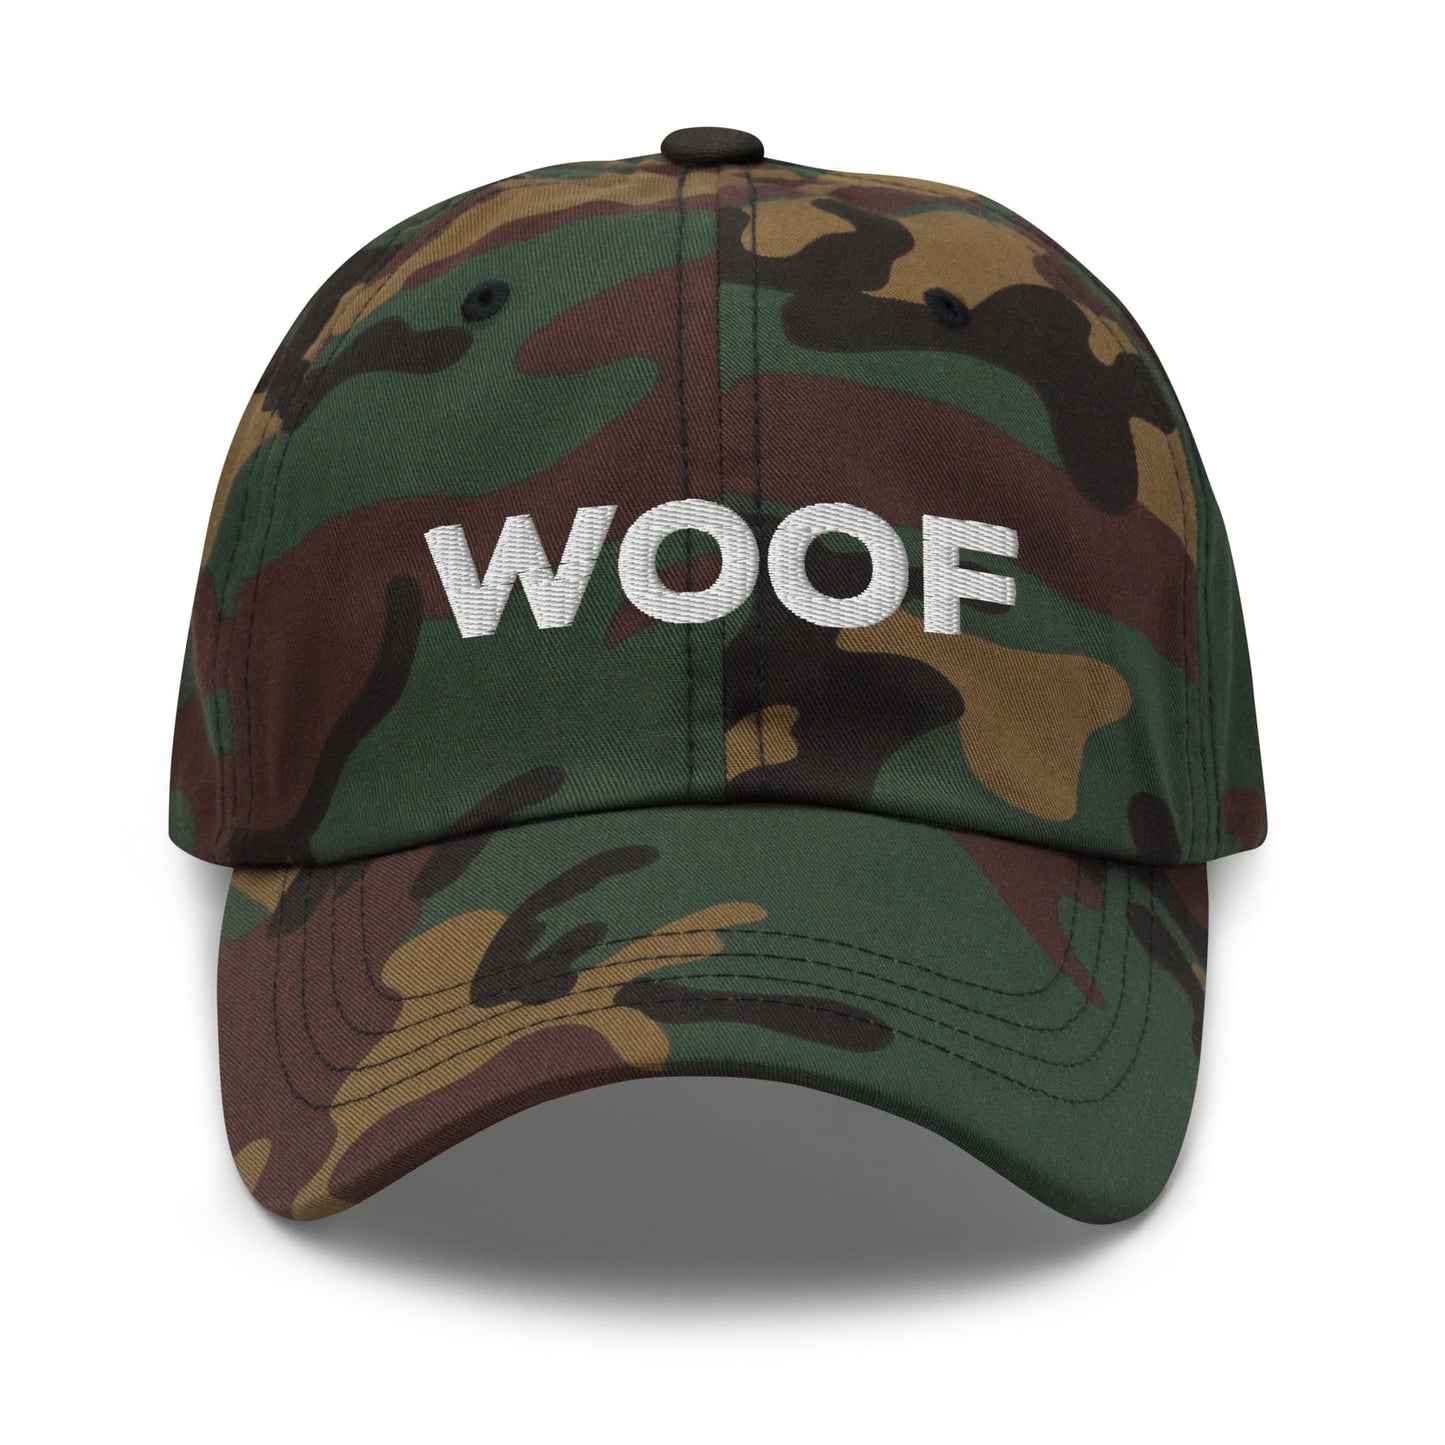 woof hat, embroidered bear pride or puppy play pride cap, camouflage